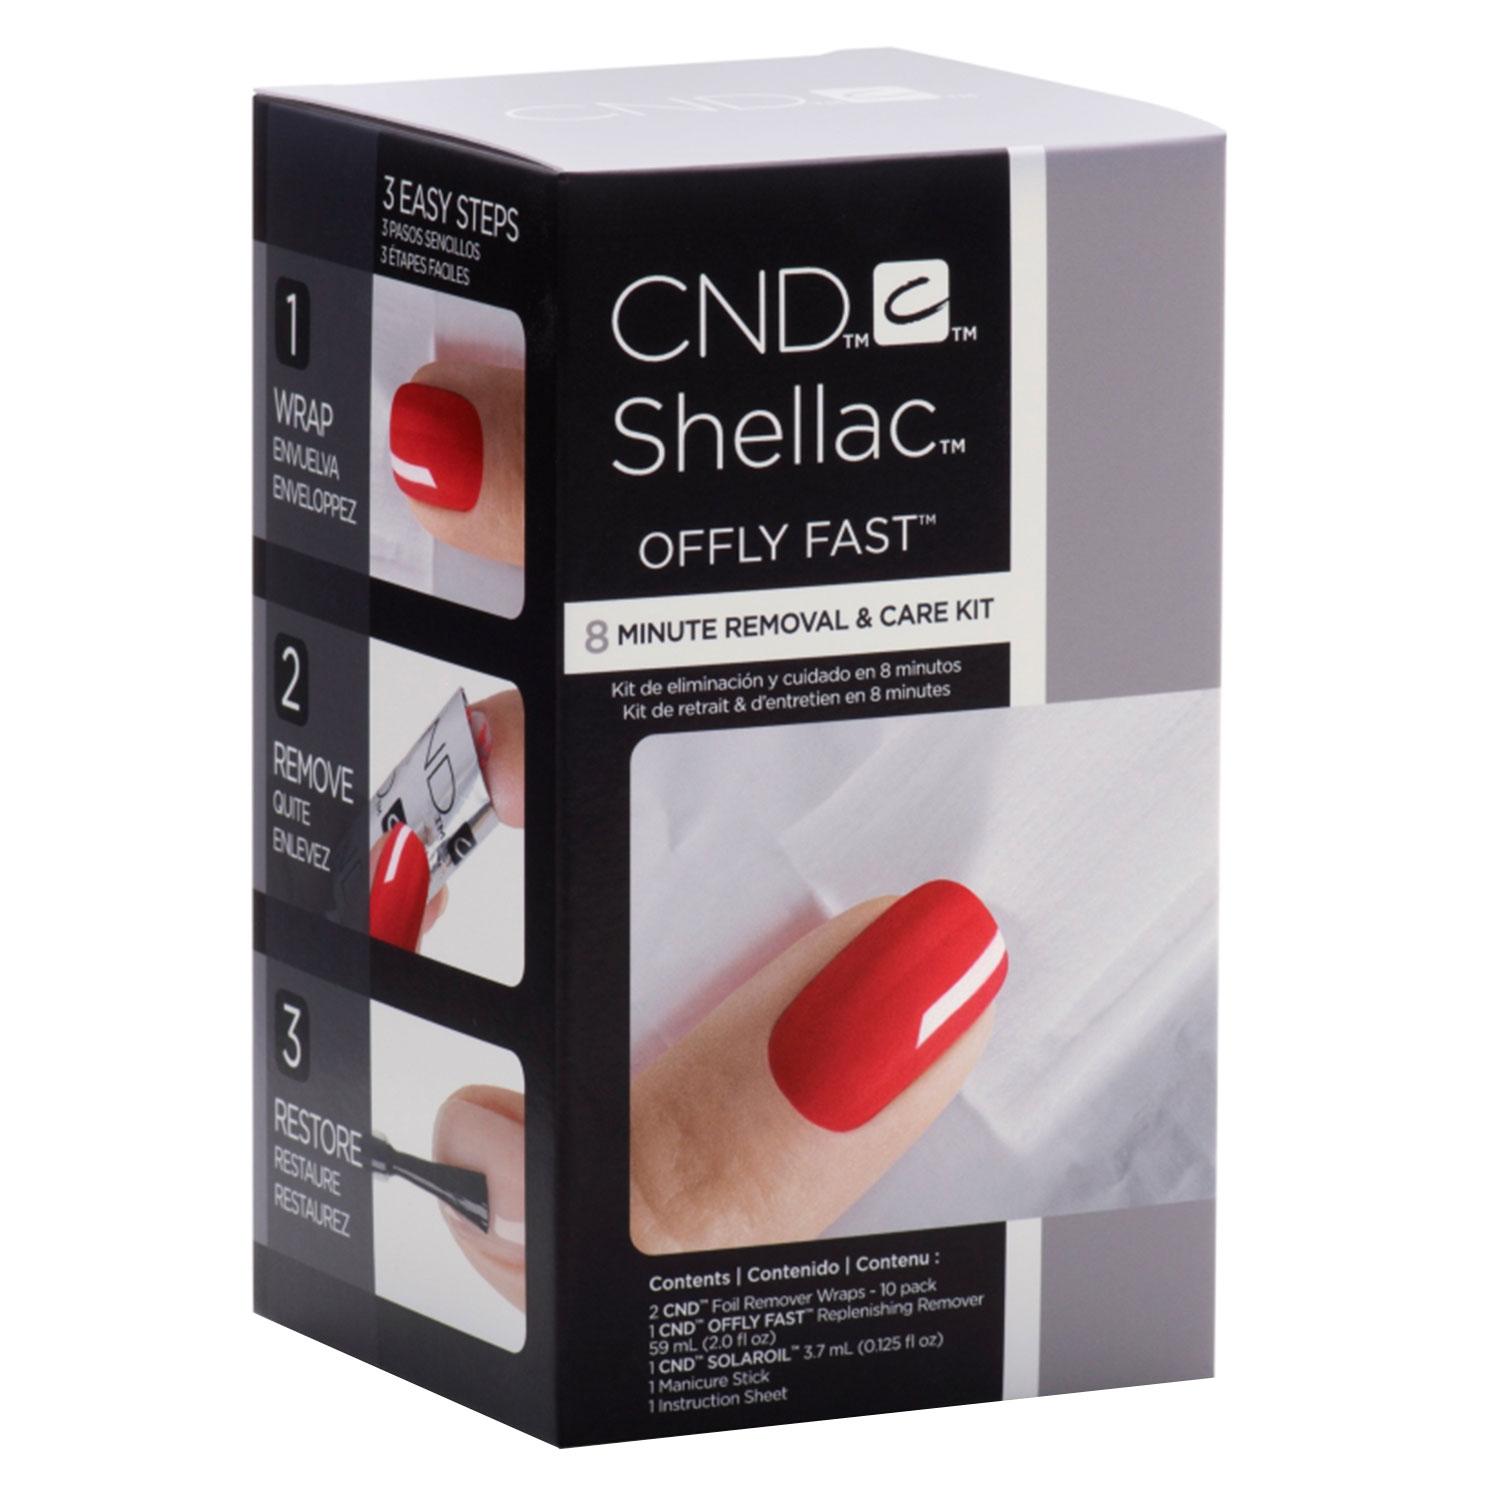 Shellac - Offly Fast 8 Minute Removal & Care Kit